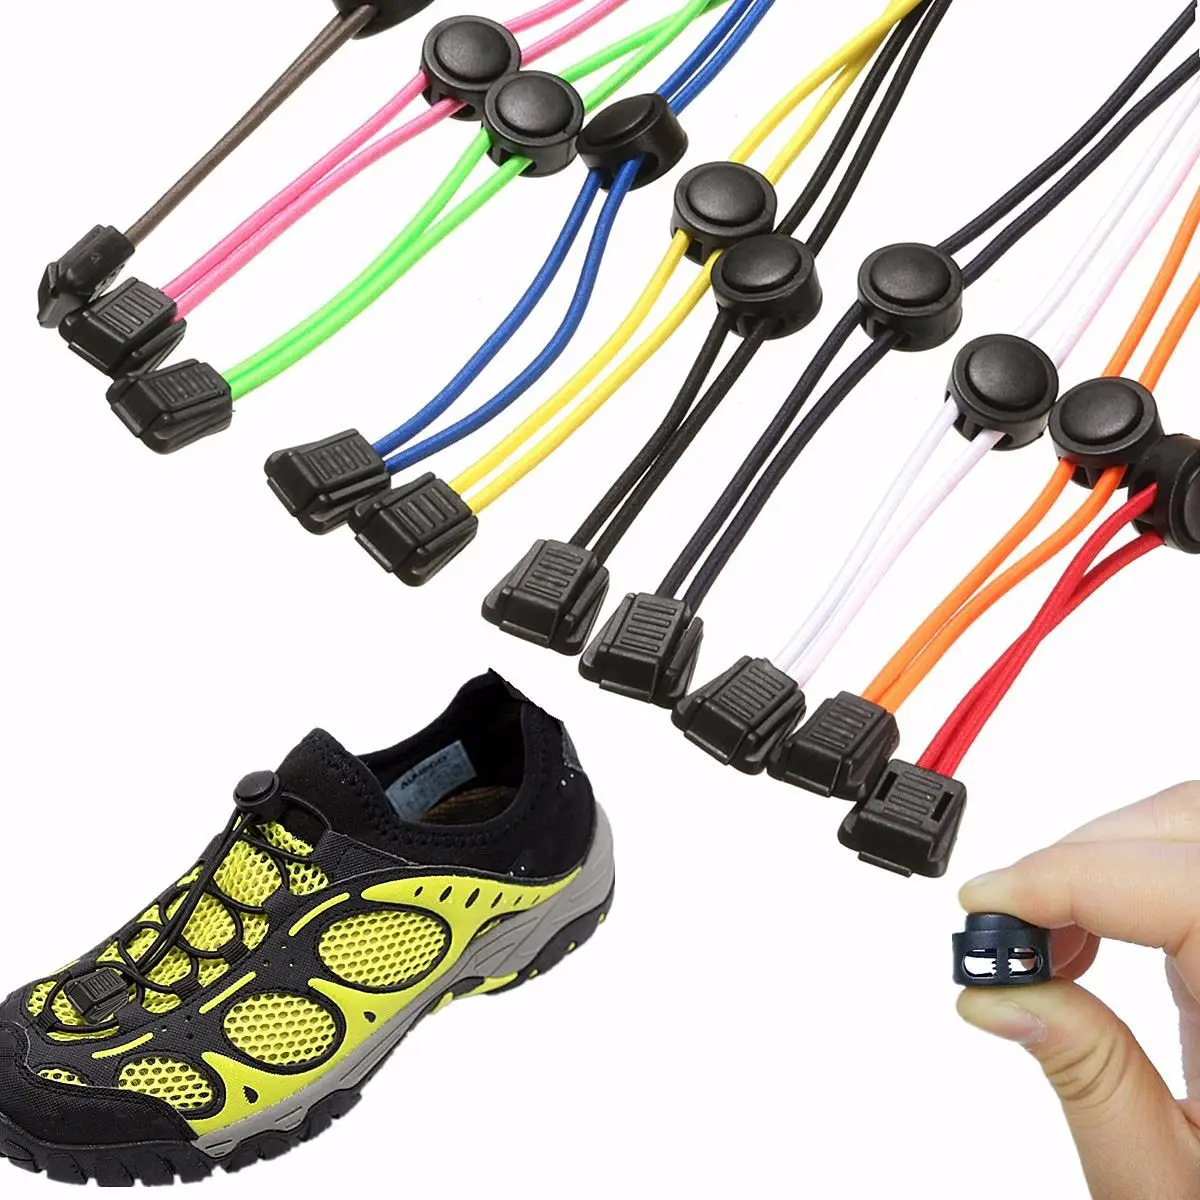 1 Pair 100cm Elastic No-Tie Shoelaces, 10 Color Polyester Stretching Locking Shoestrings With Buckles Lock For Sport Shoes